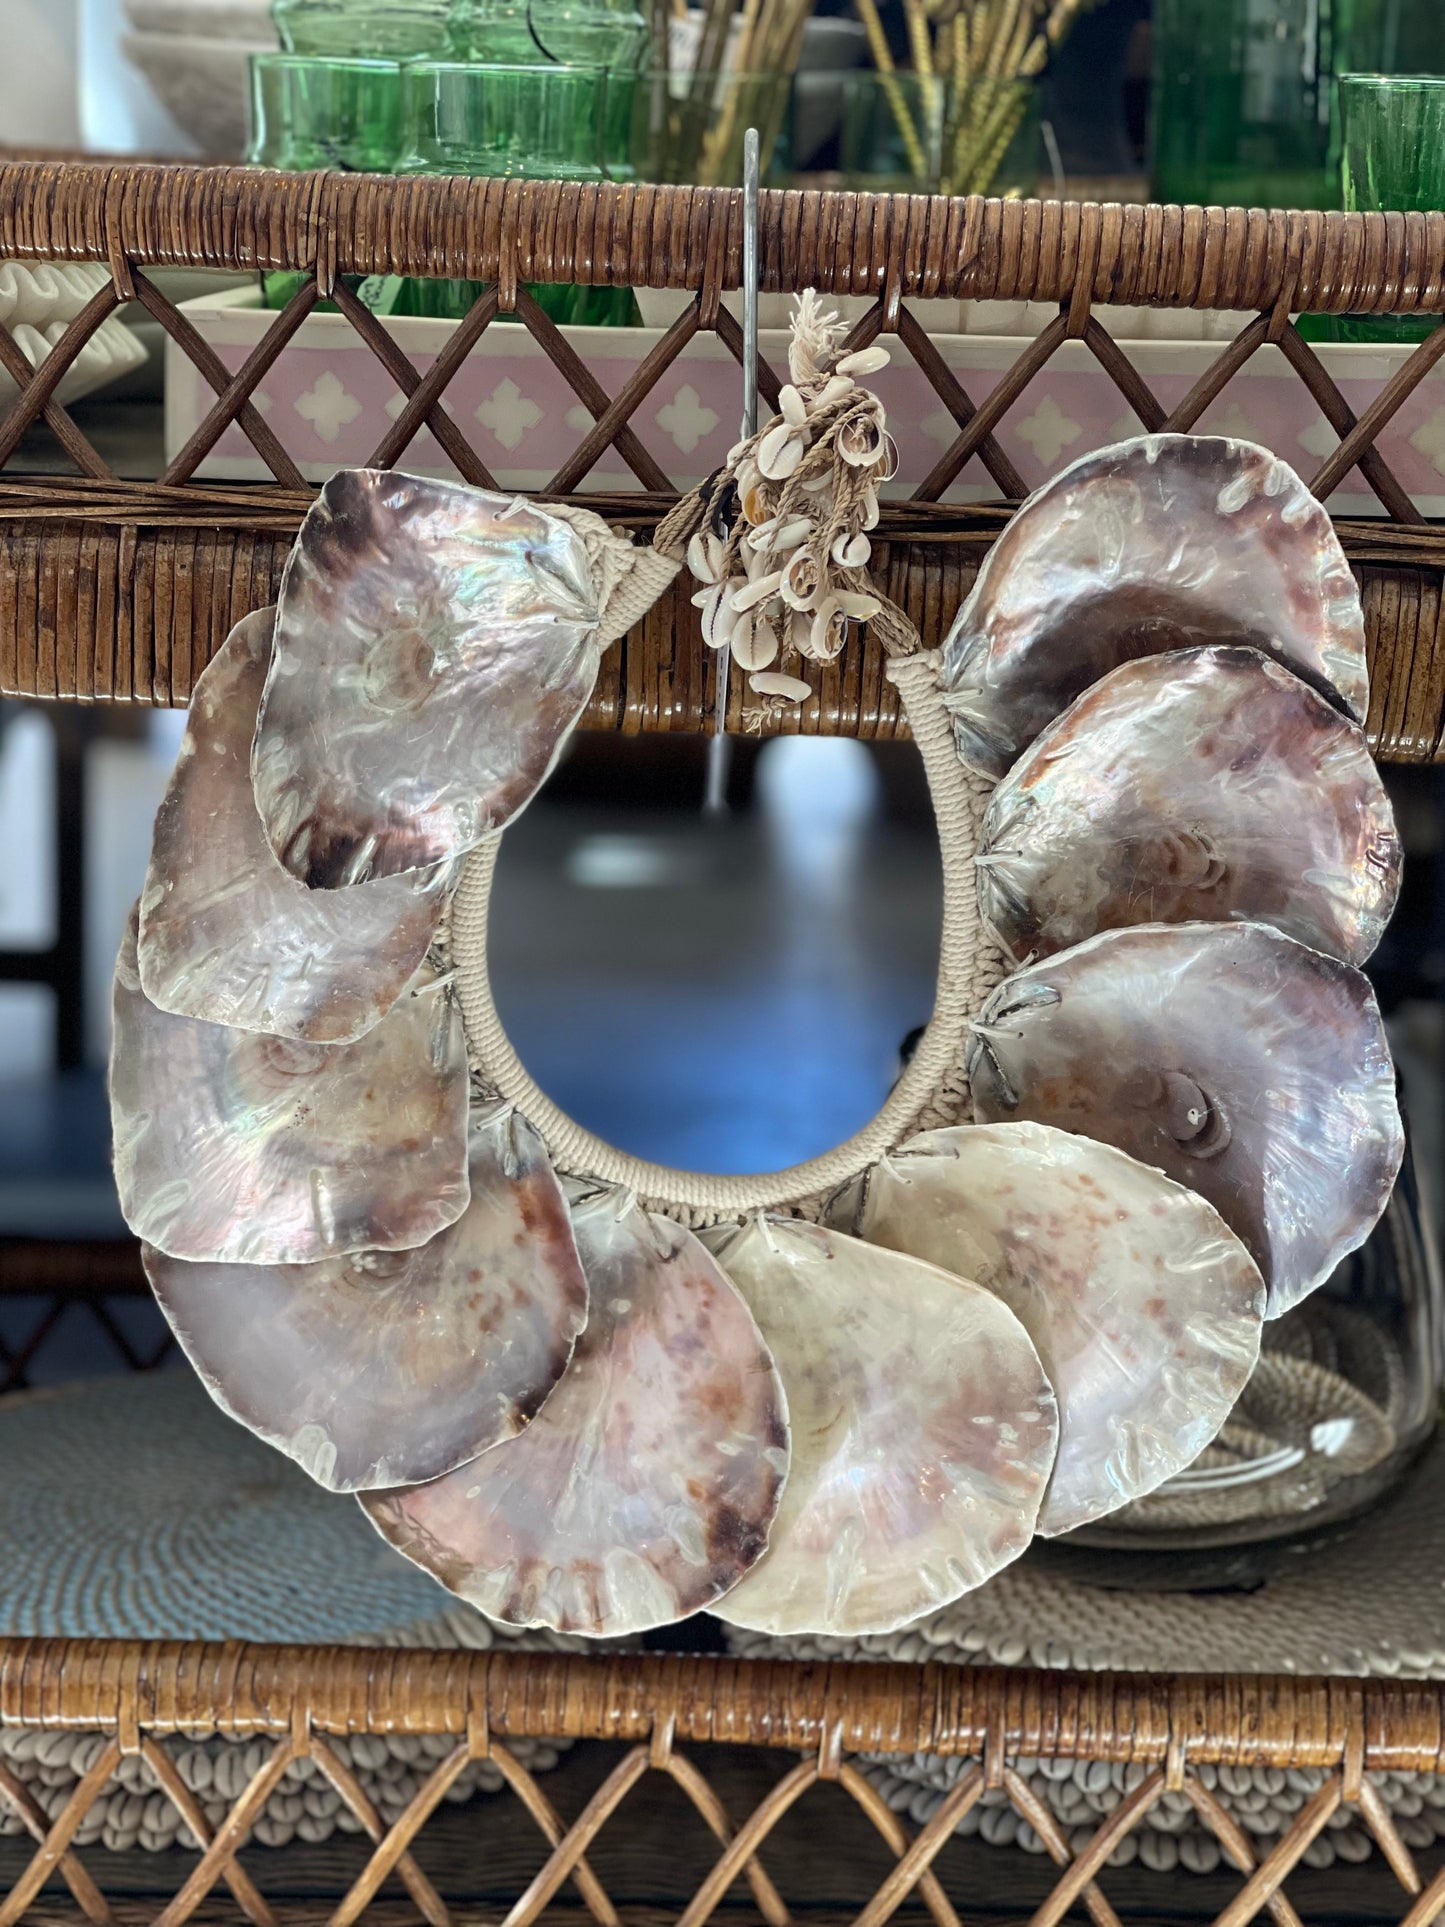 DECORATIVE SHELL NECKLACE